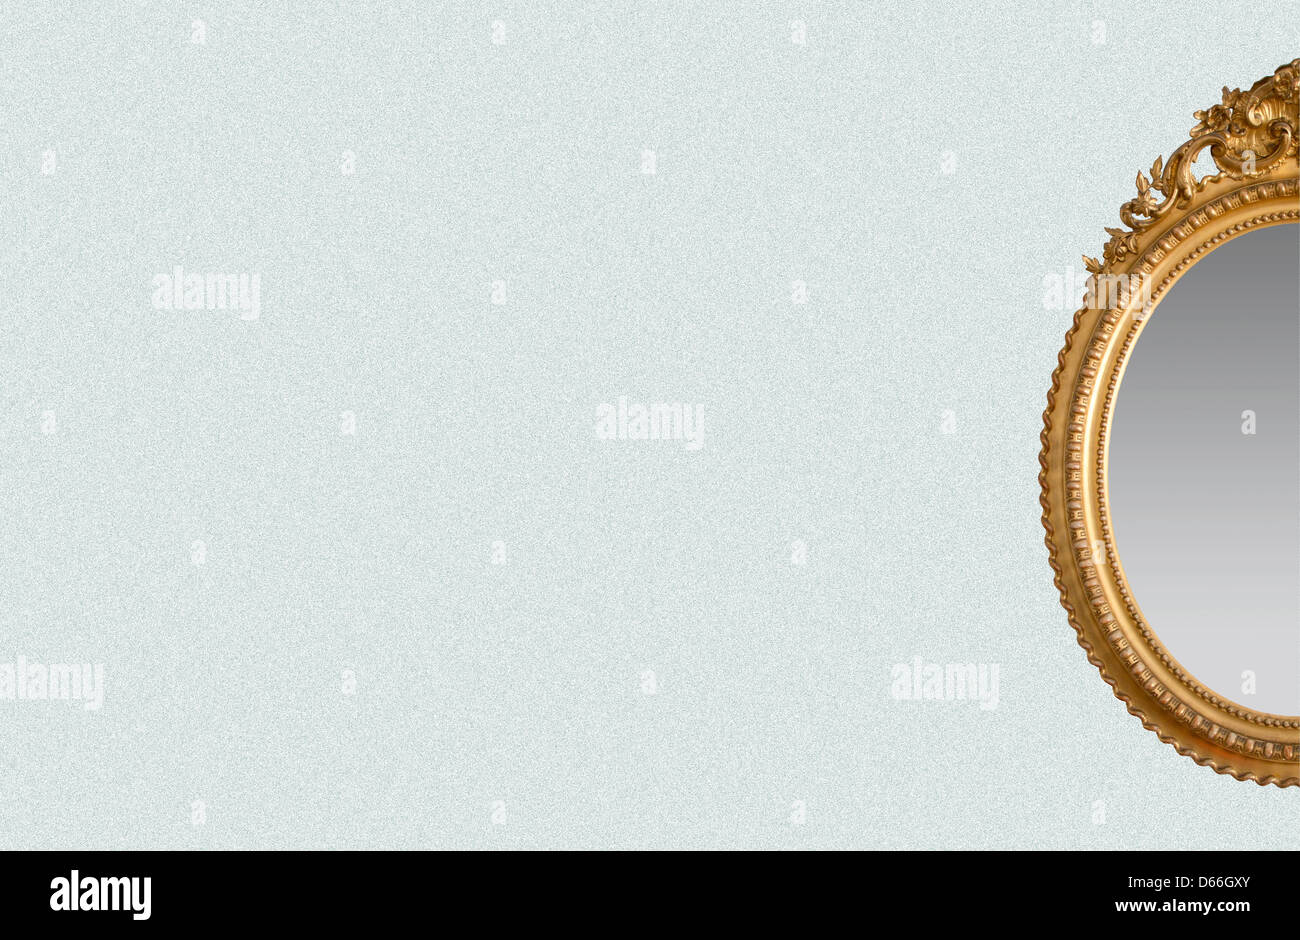 An ornate golden mirror on a white background. Stock Photo